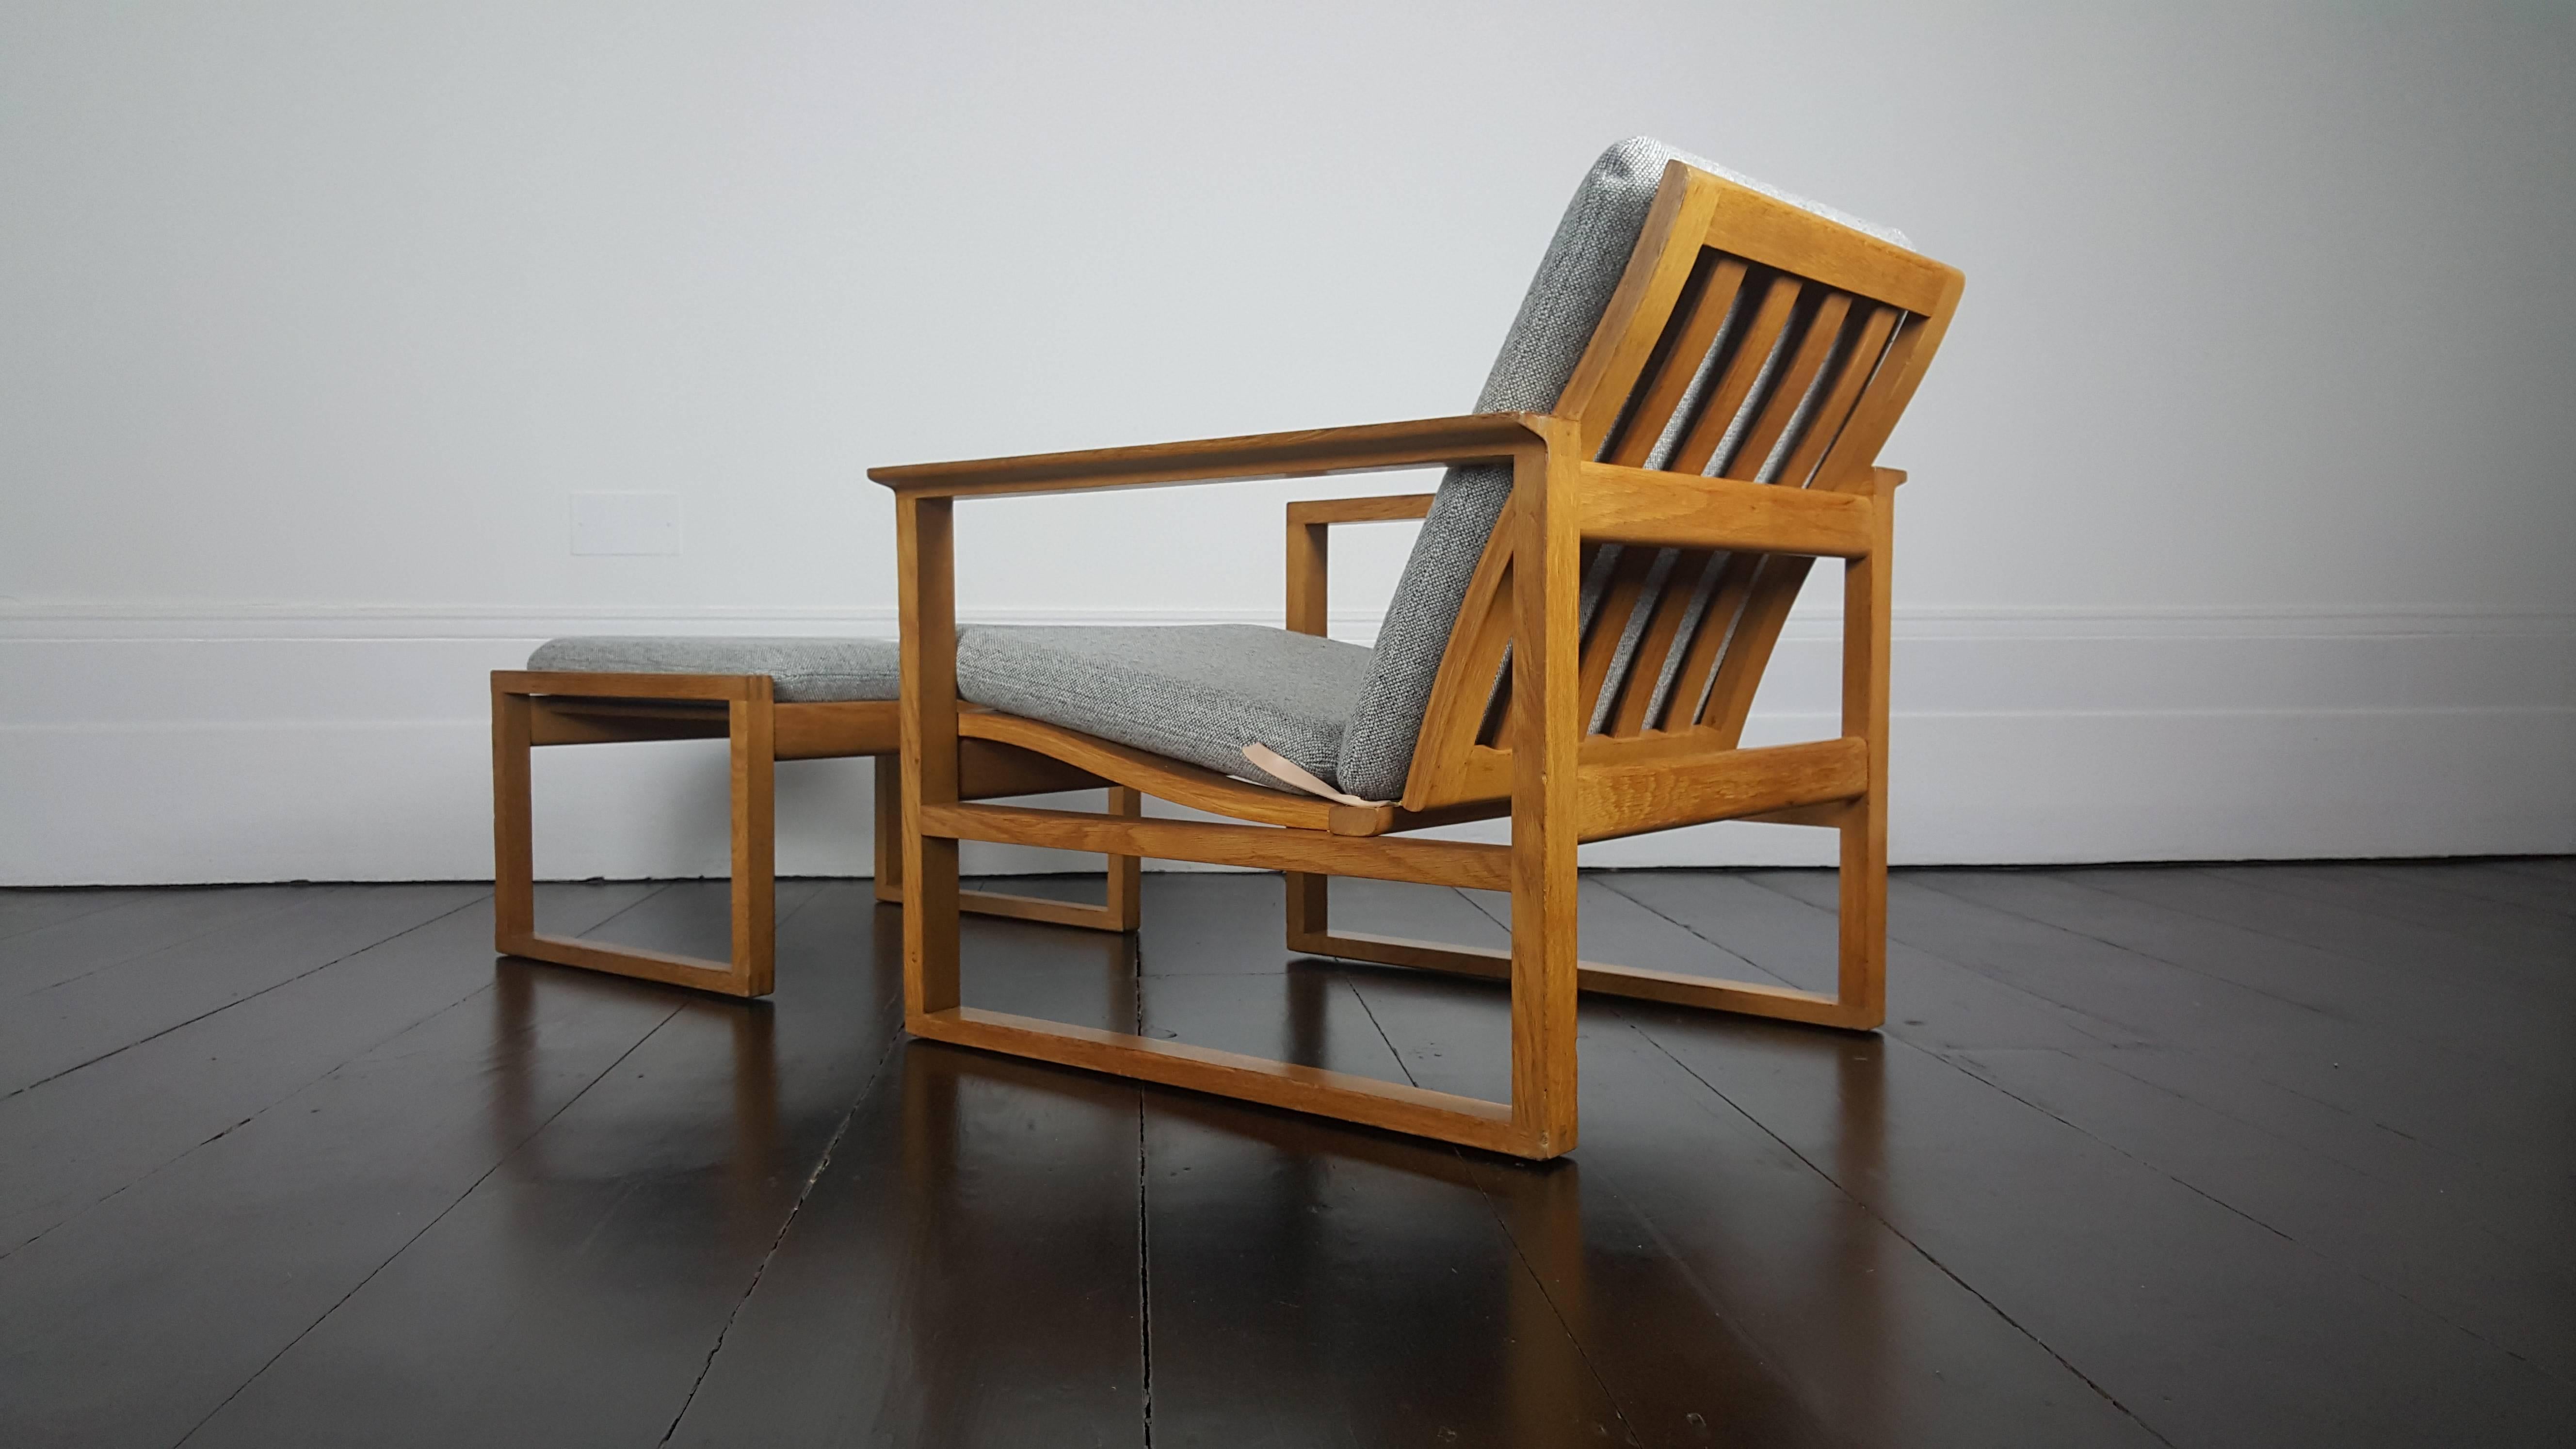 20th Century Børge Mogensen Oak Lounge Sled Chair and Footstool Designed 1956 for Frederica 